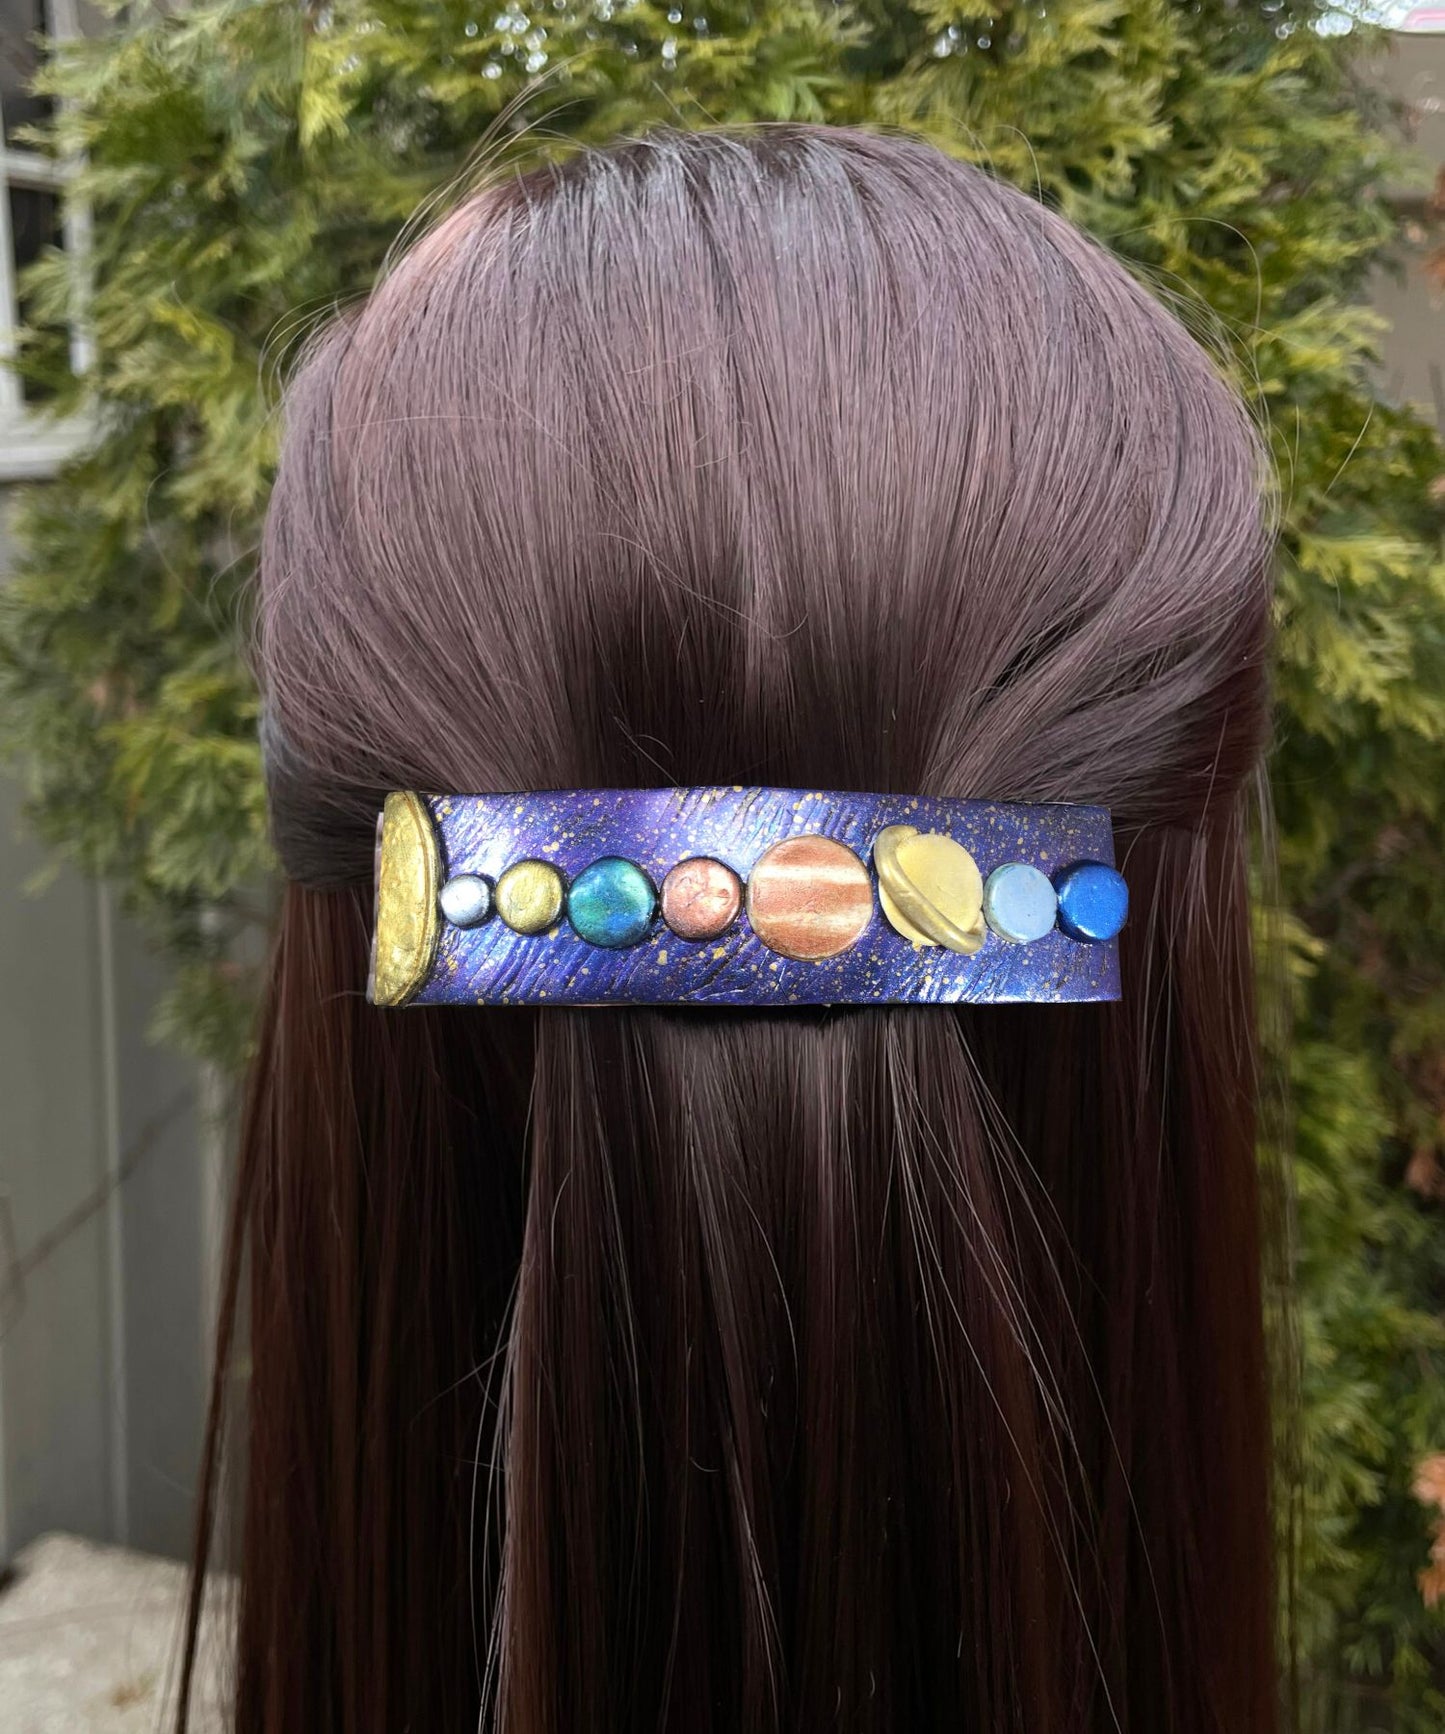 Handmade polymer clay hair barrette with purple/blue base with gold stars and hand painted solar system in clay represented in a line from the sun on far left  in model's hair.